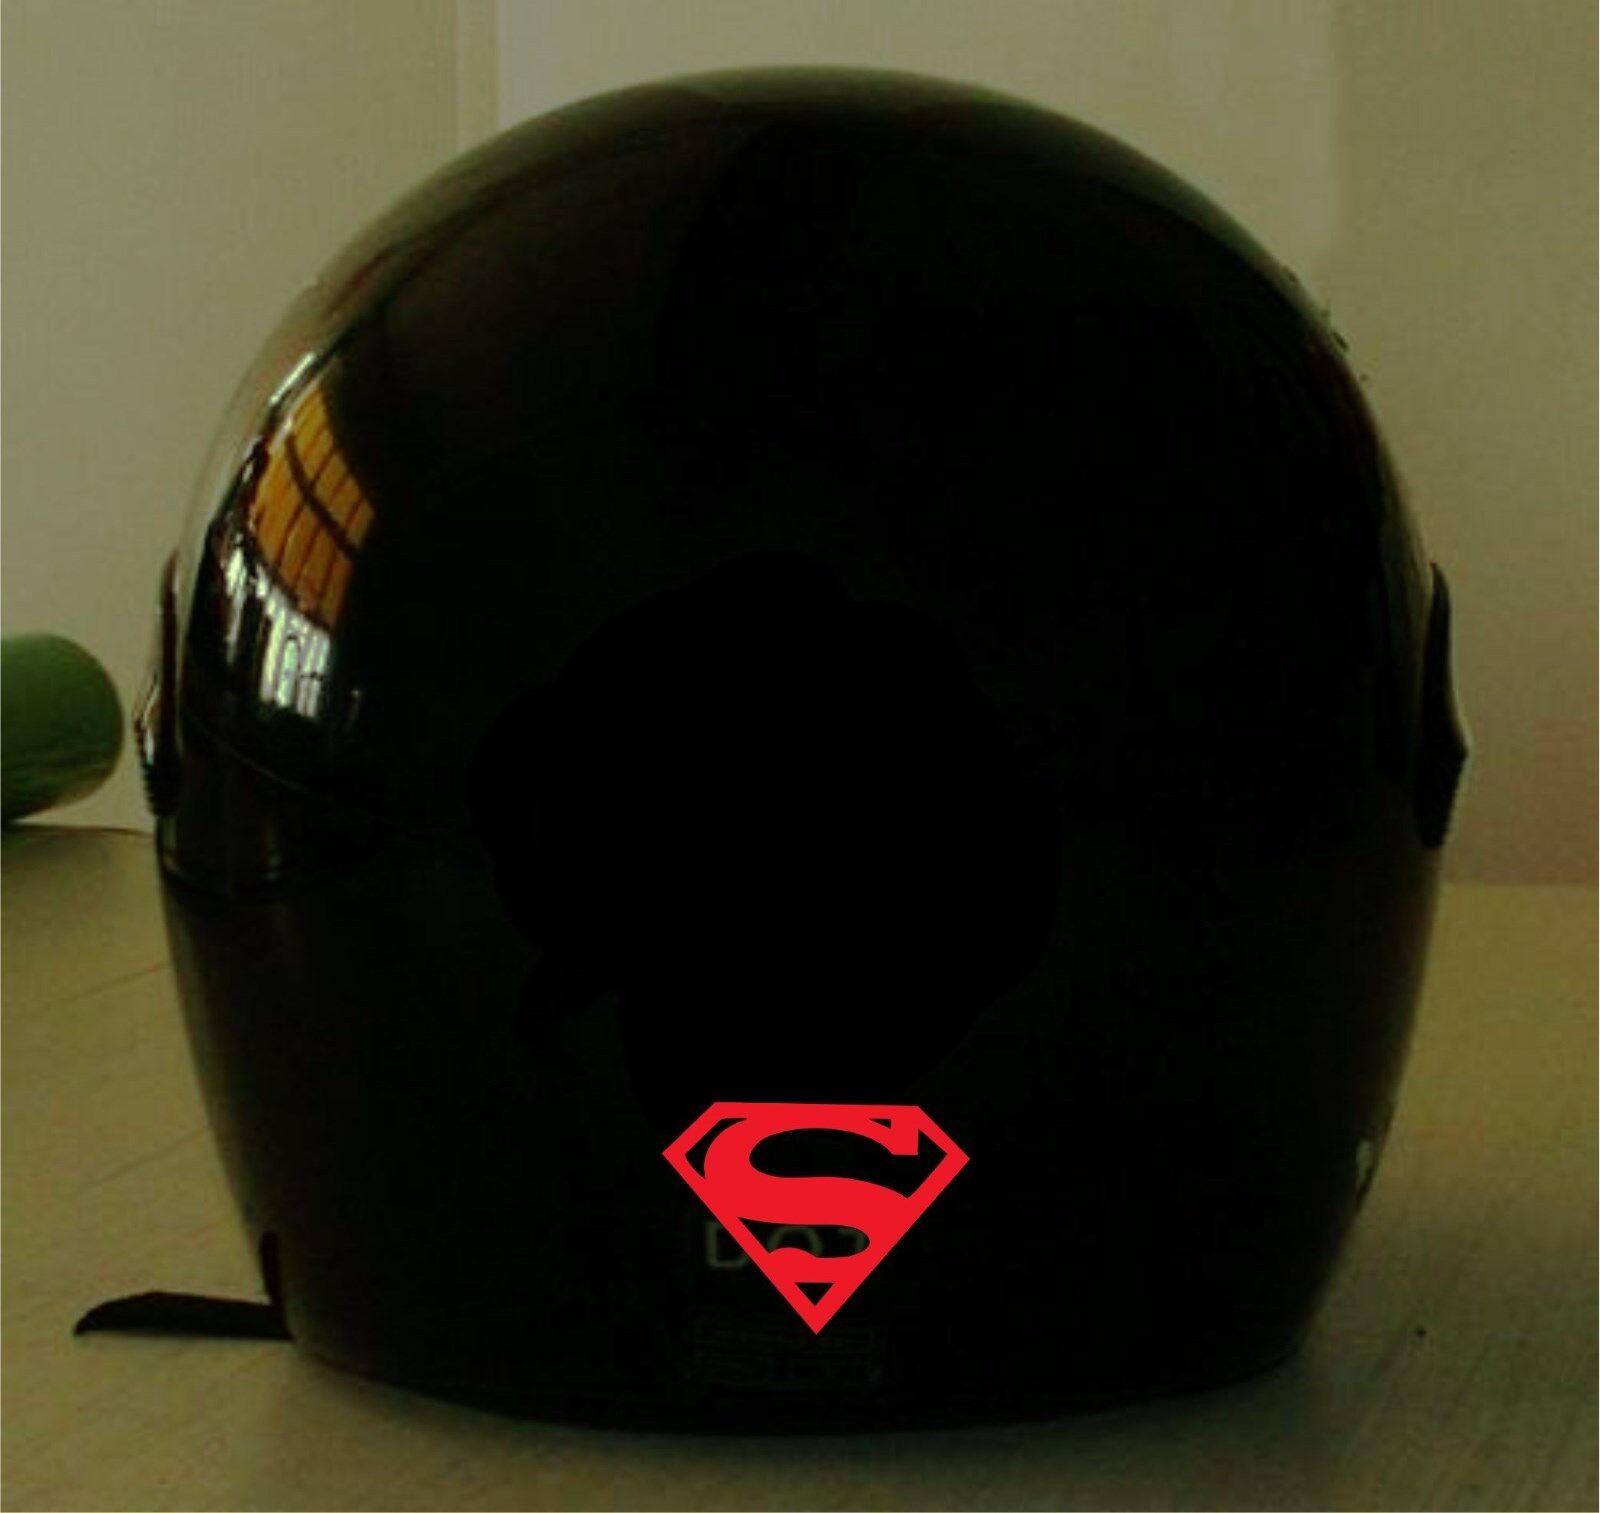 SUPERMAN  REFLECTIVE MOTORCYCLE HELMET DECAL..2 FOR 1 PRICING